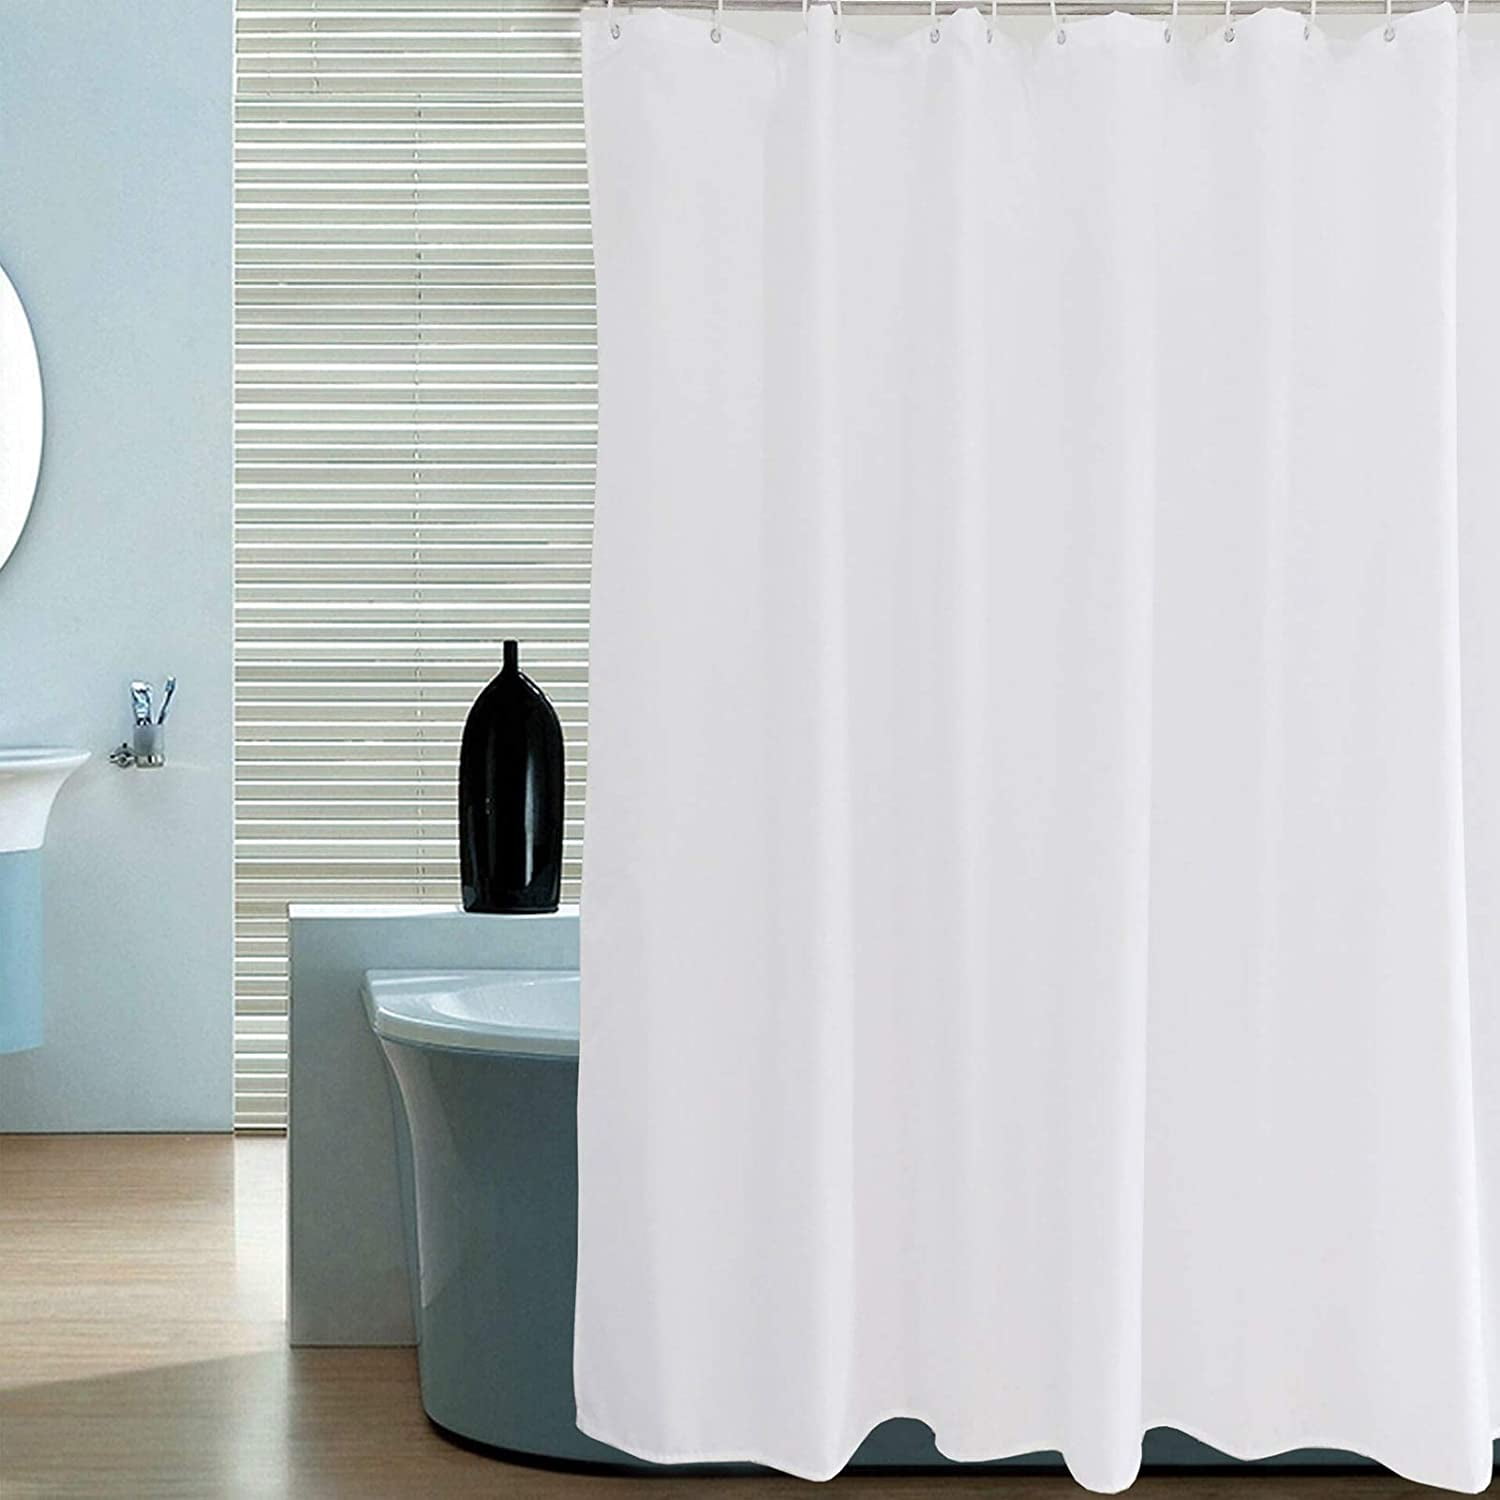 Shower Curtain Liner Fabric, What Is The Typical Length Of A Shower Curtain